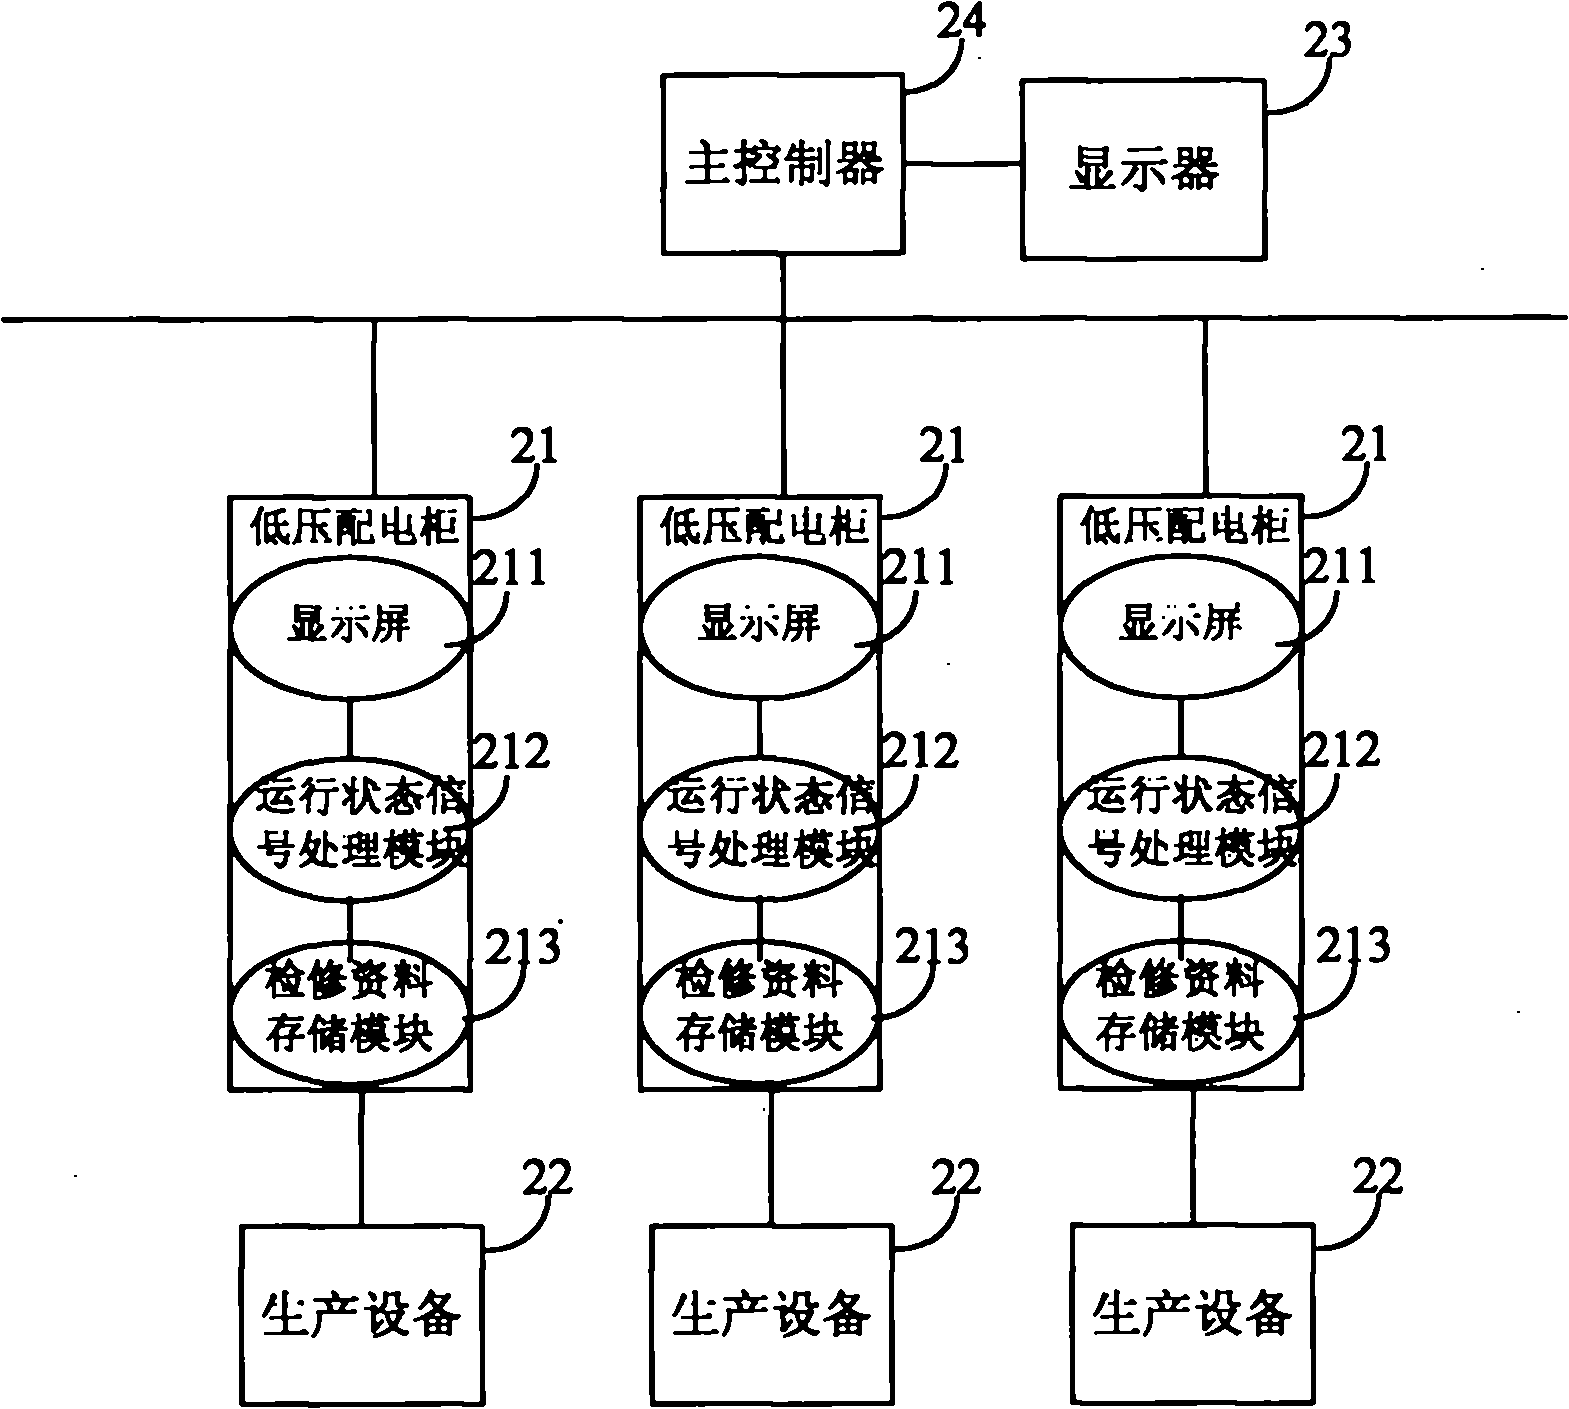 Low-voltage power distribution system and low-voltage power distribution box